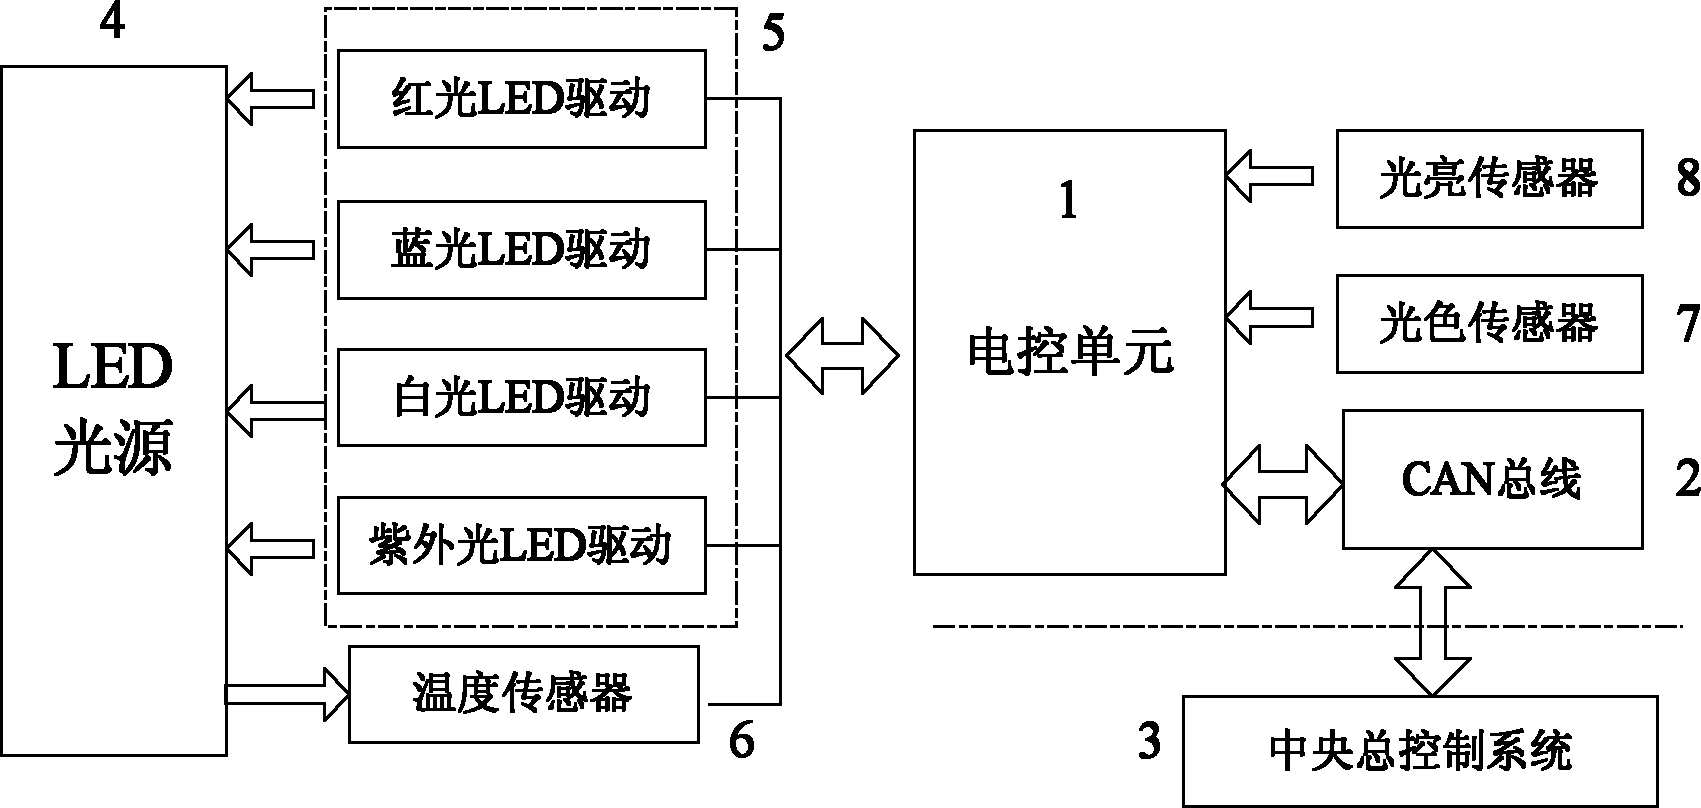 Control system for LEDs applied to plant illumination